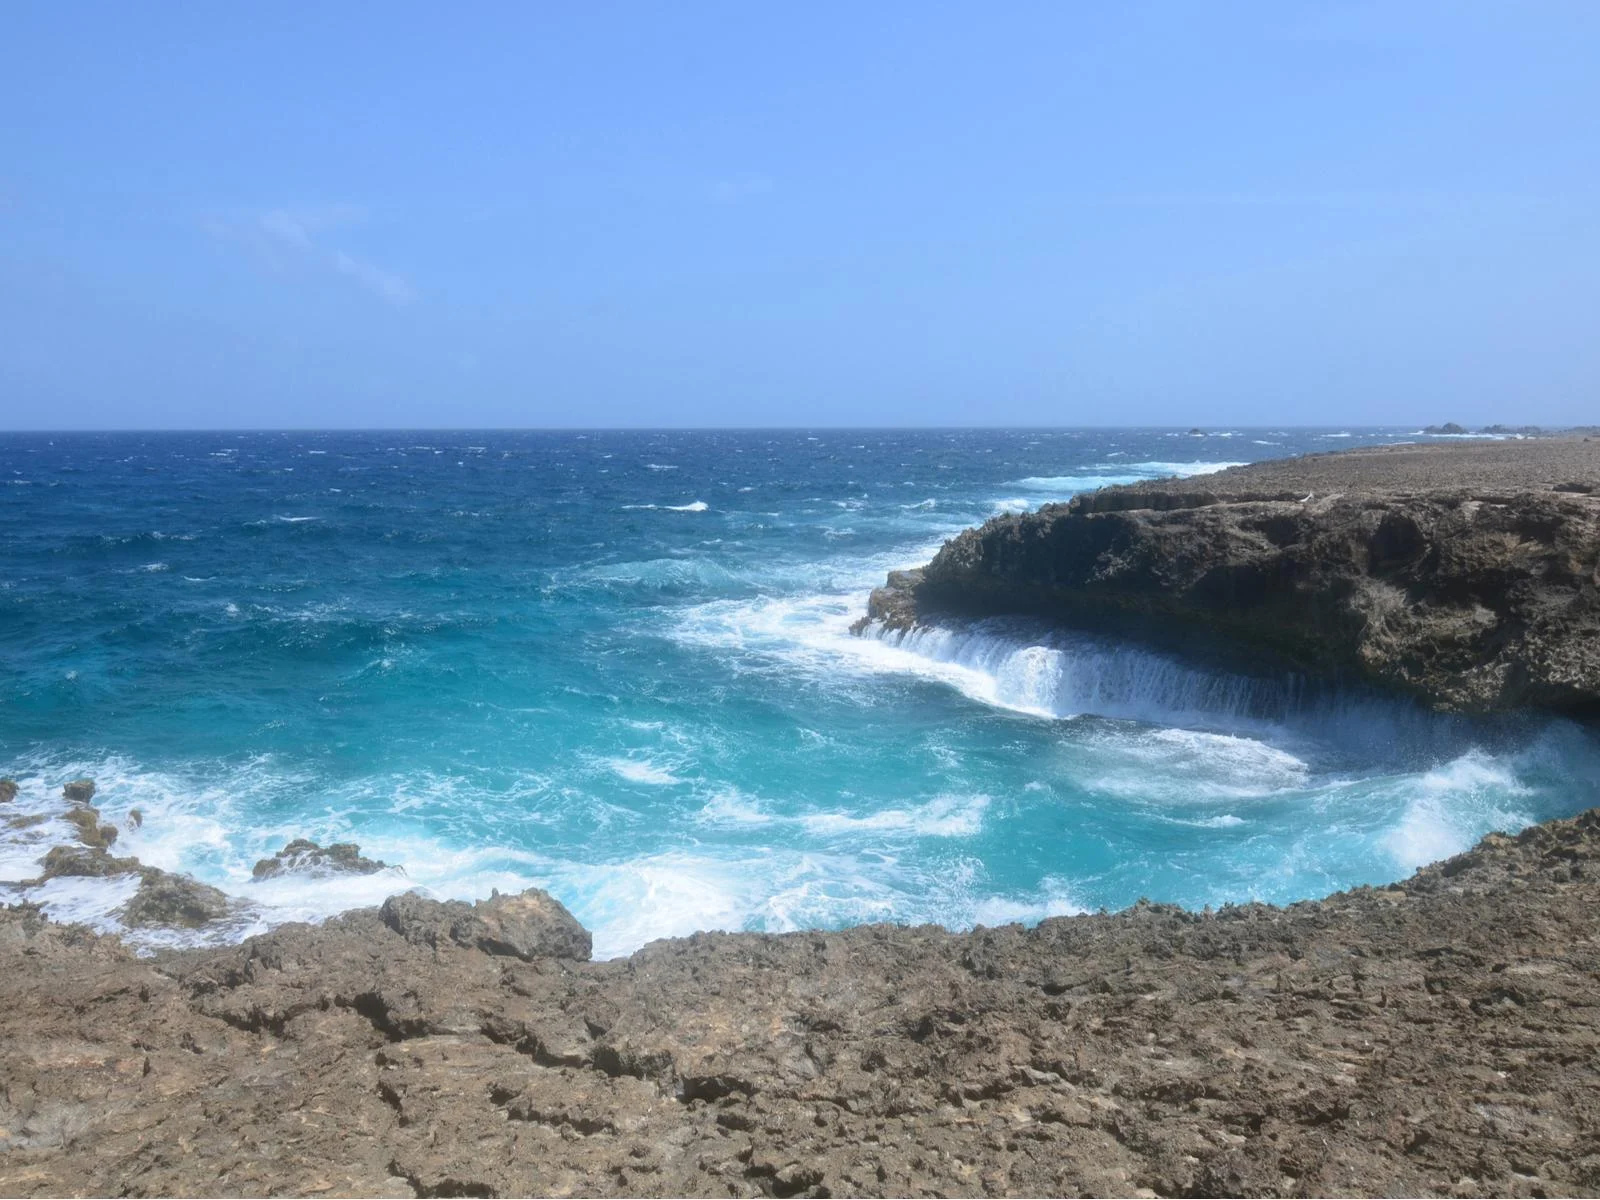 A cliff-like rocky coast of Daimari Beach, one of the best beaches in Aruba, with its deep and creamy waters due to strong waves crashing